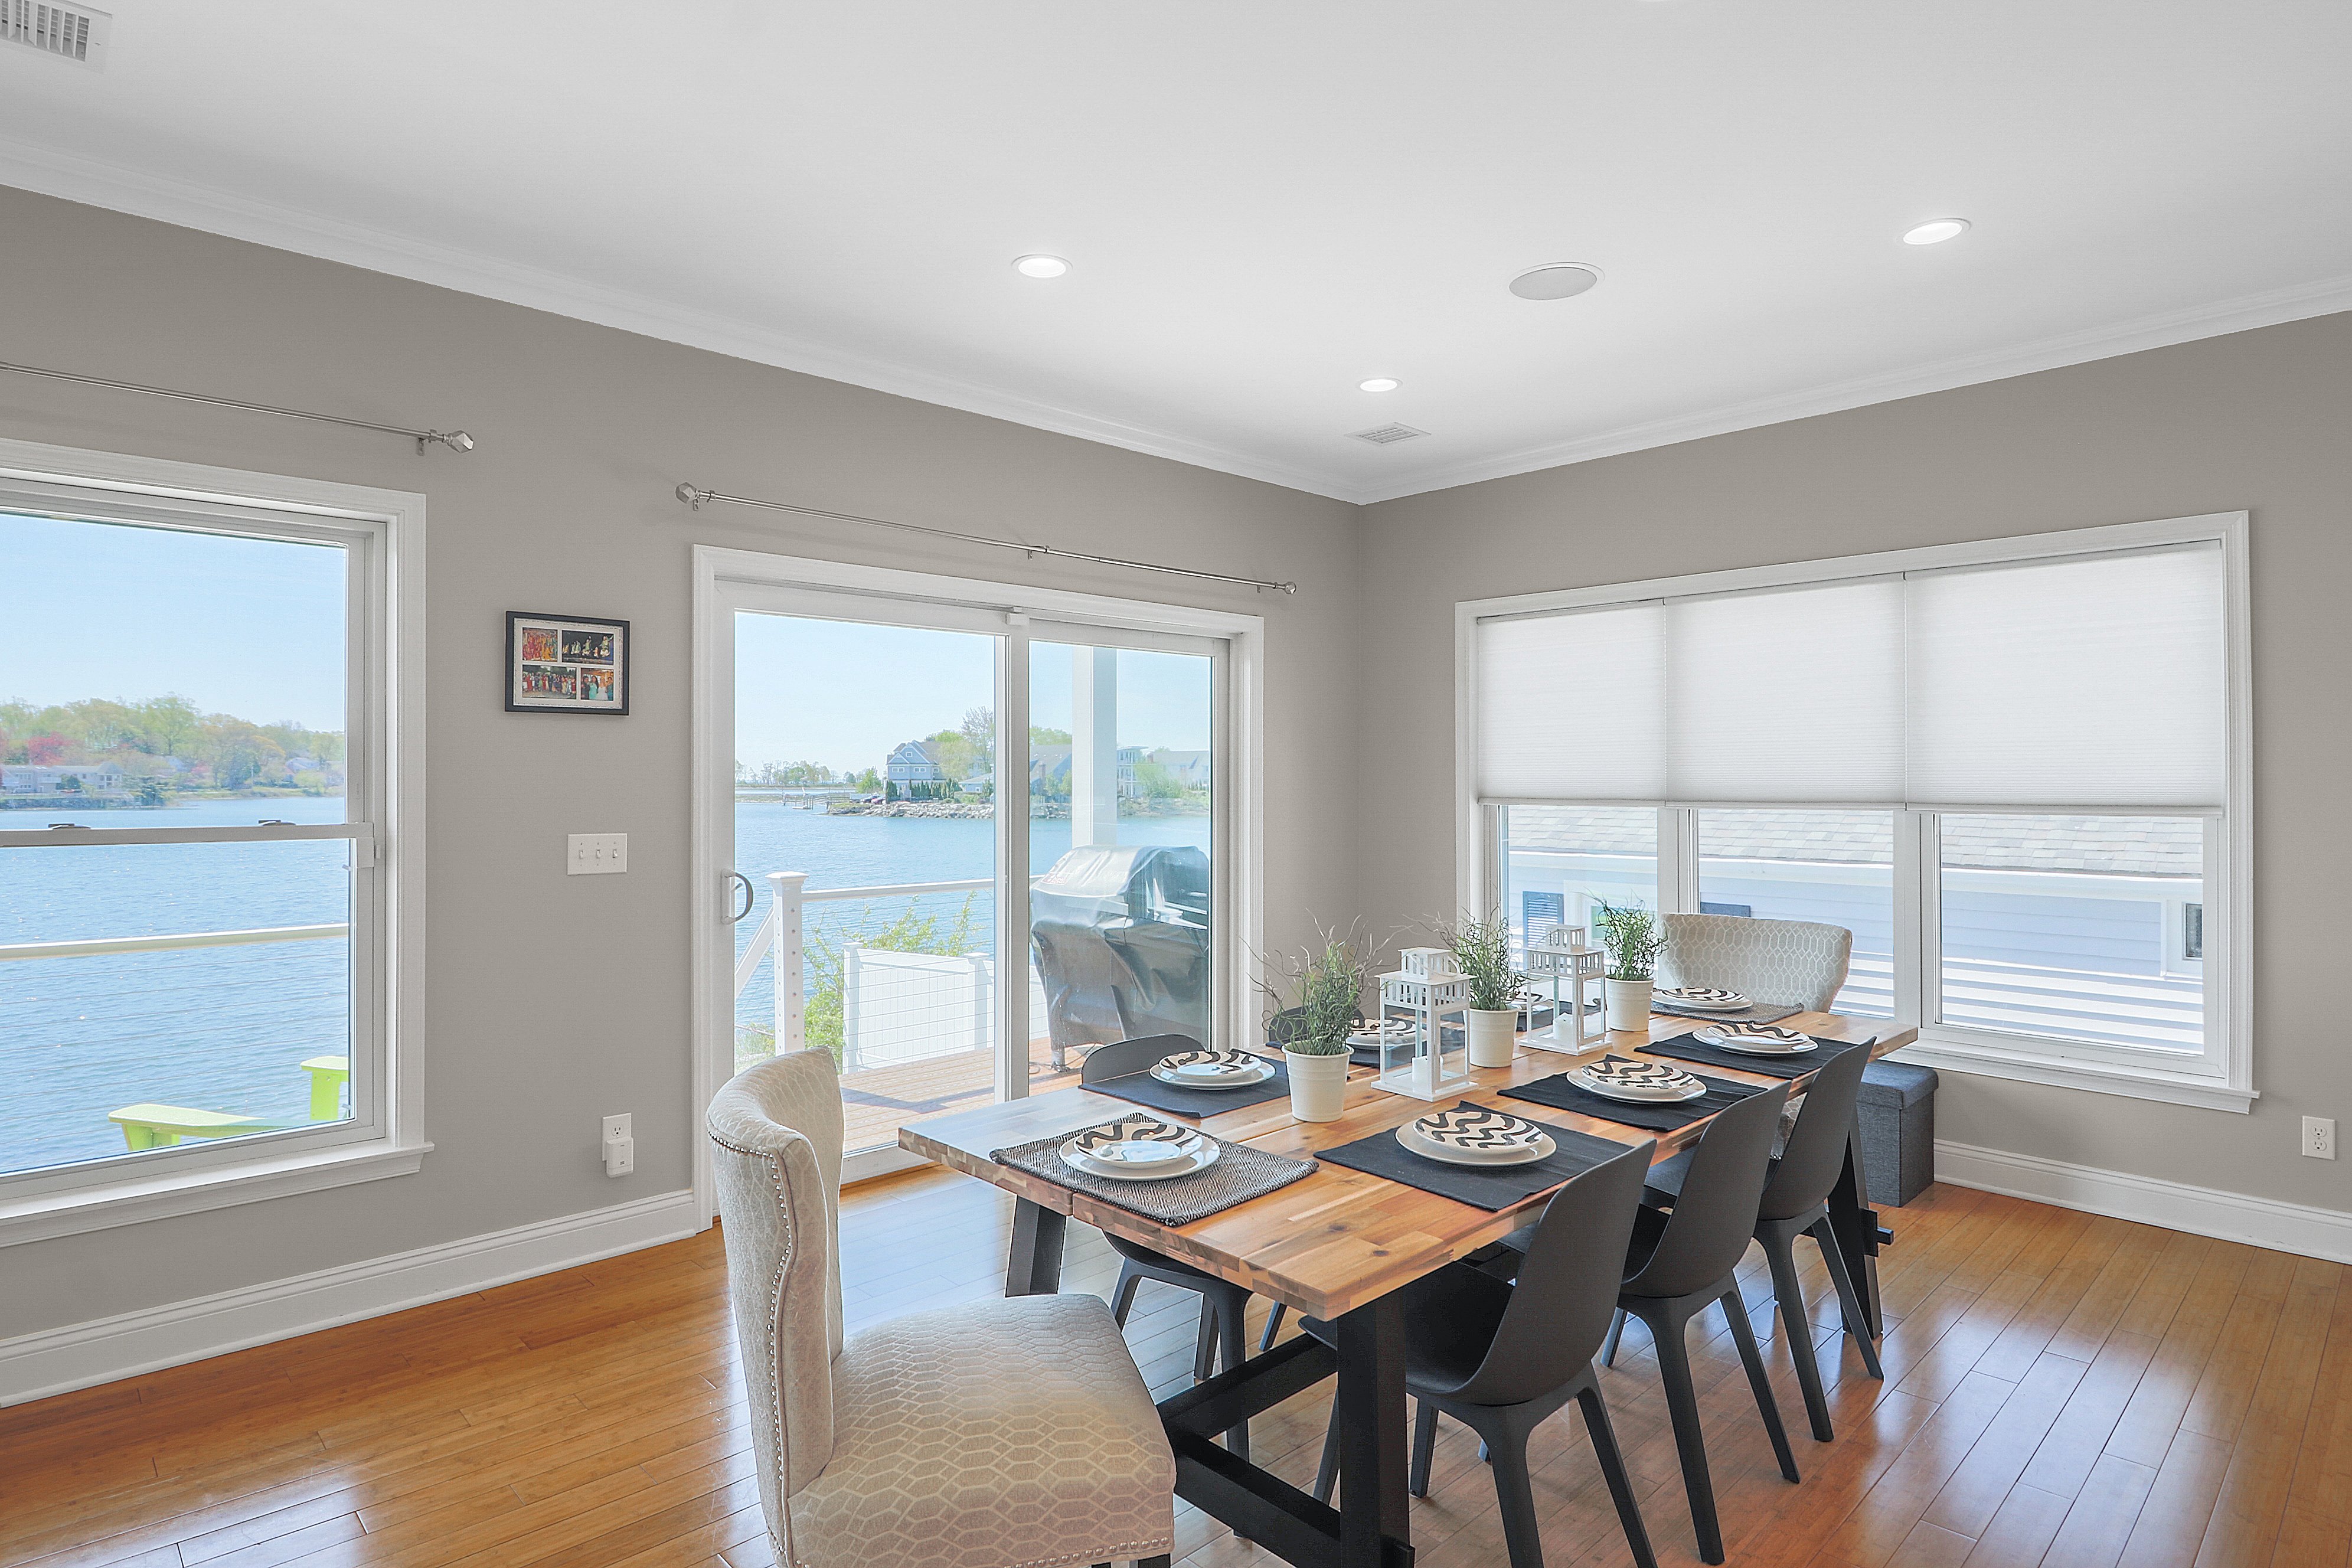 dining room table overlooking lake view